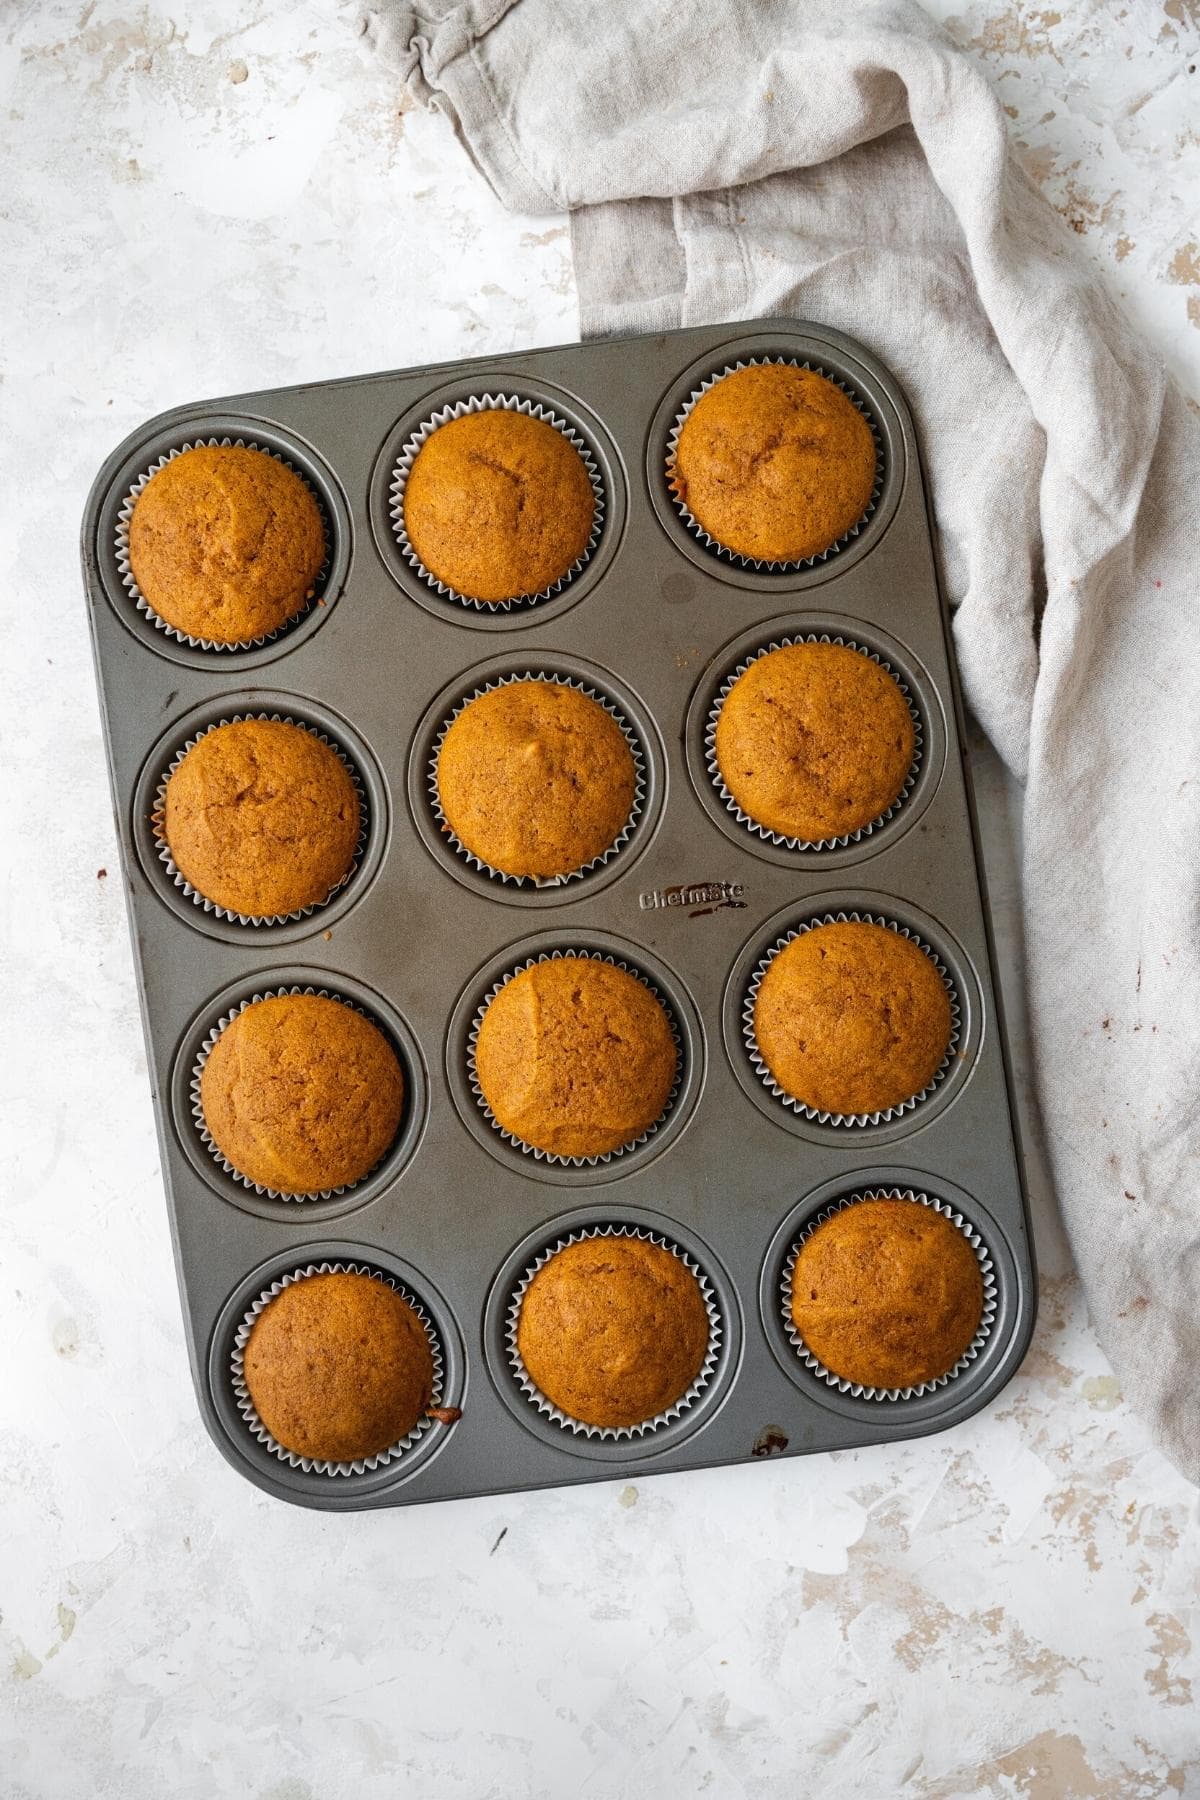 Pumpkin Cupcakes baked unfrosted in baking pan